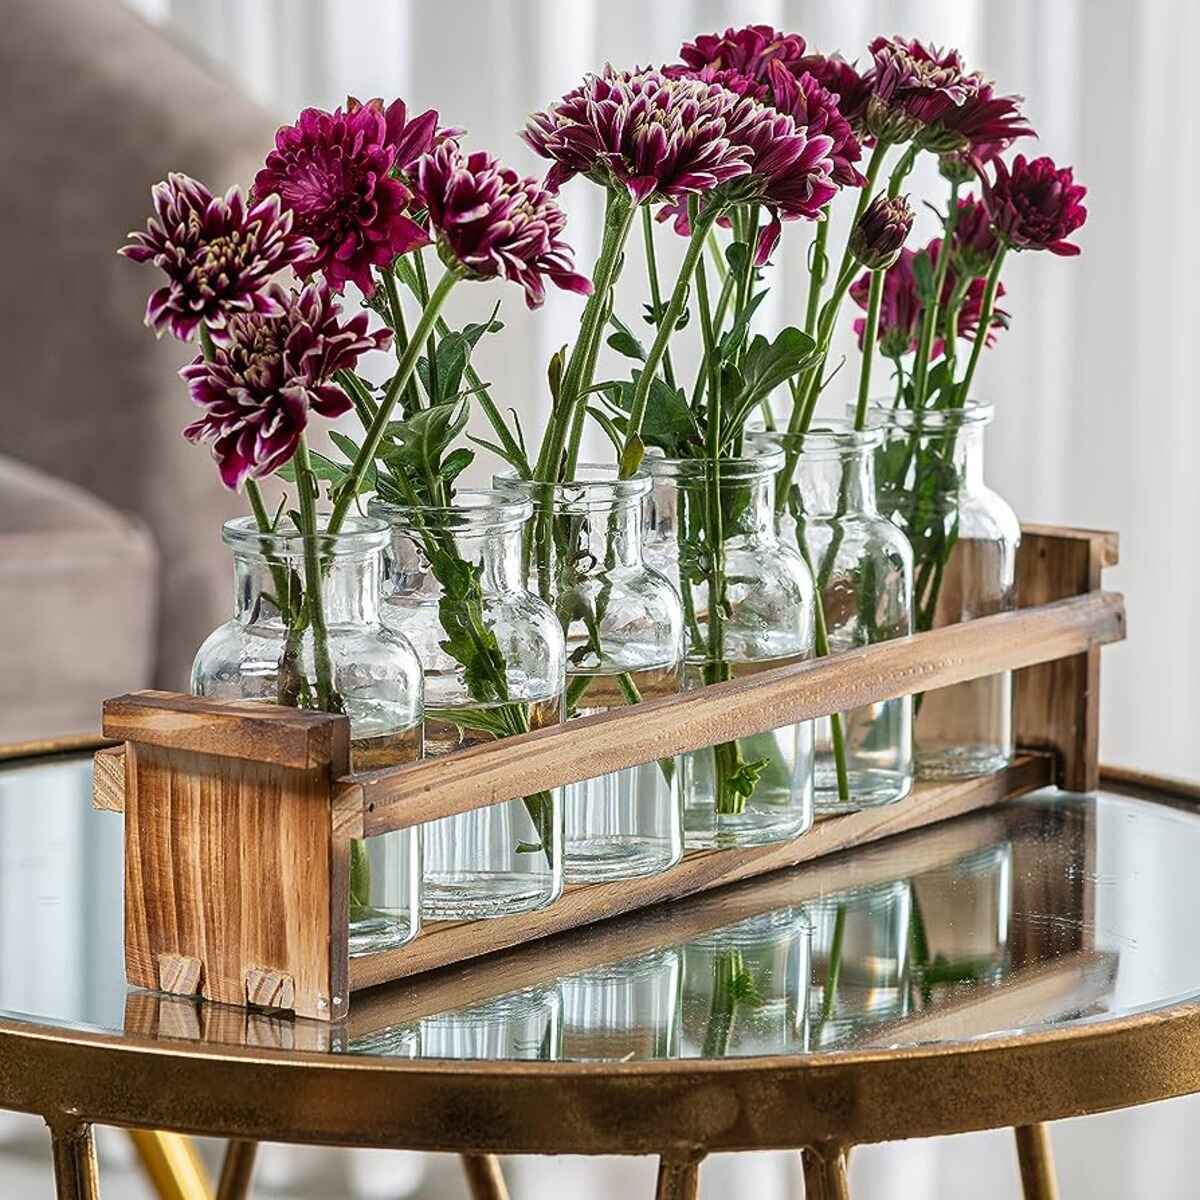 Where To Buy A Flower Vase